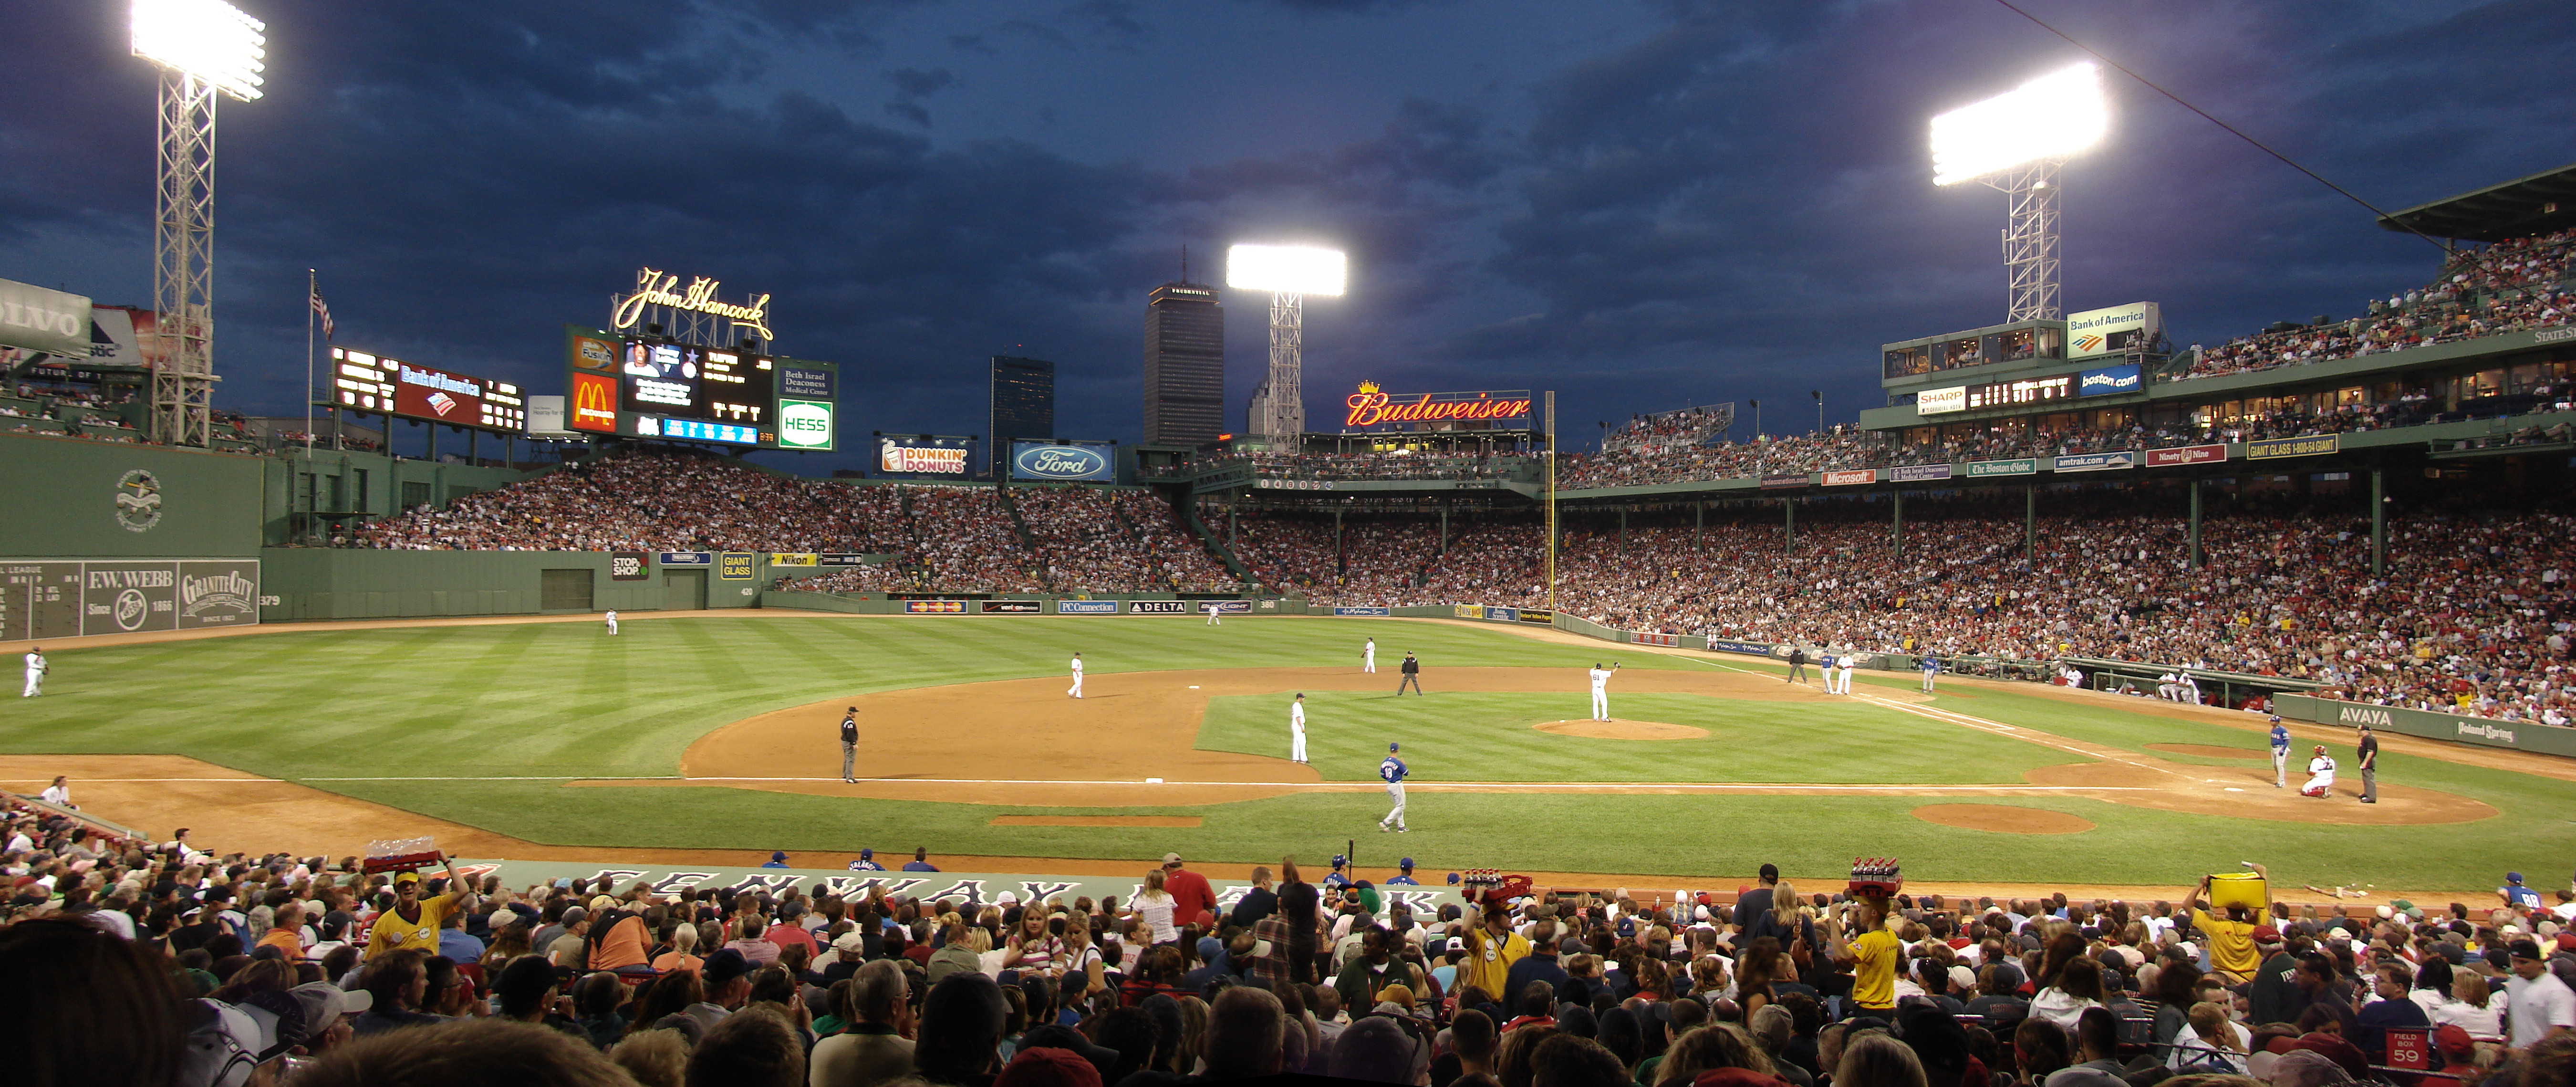 fenway park at night photography